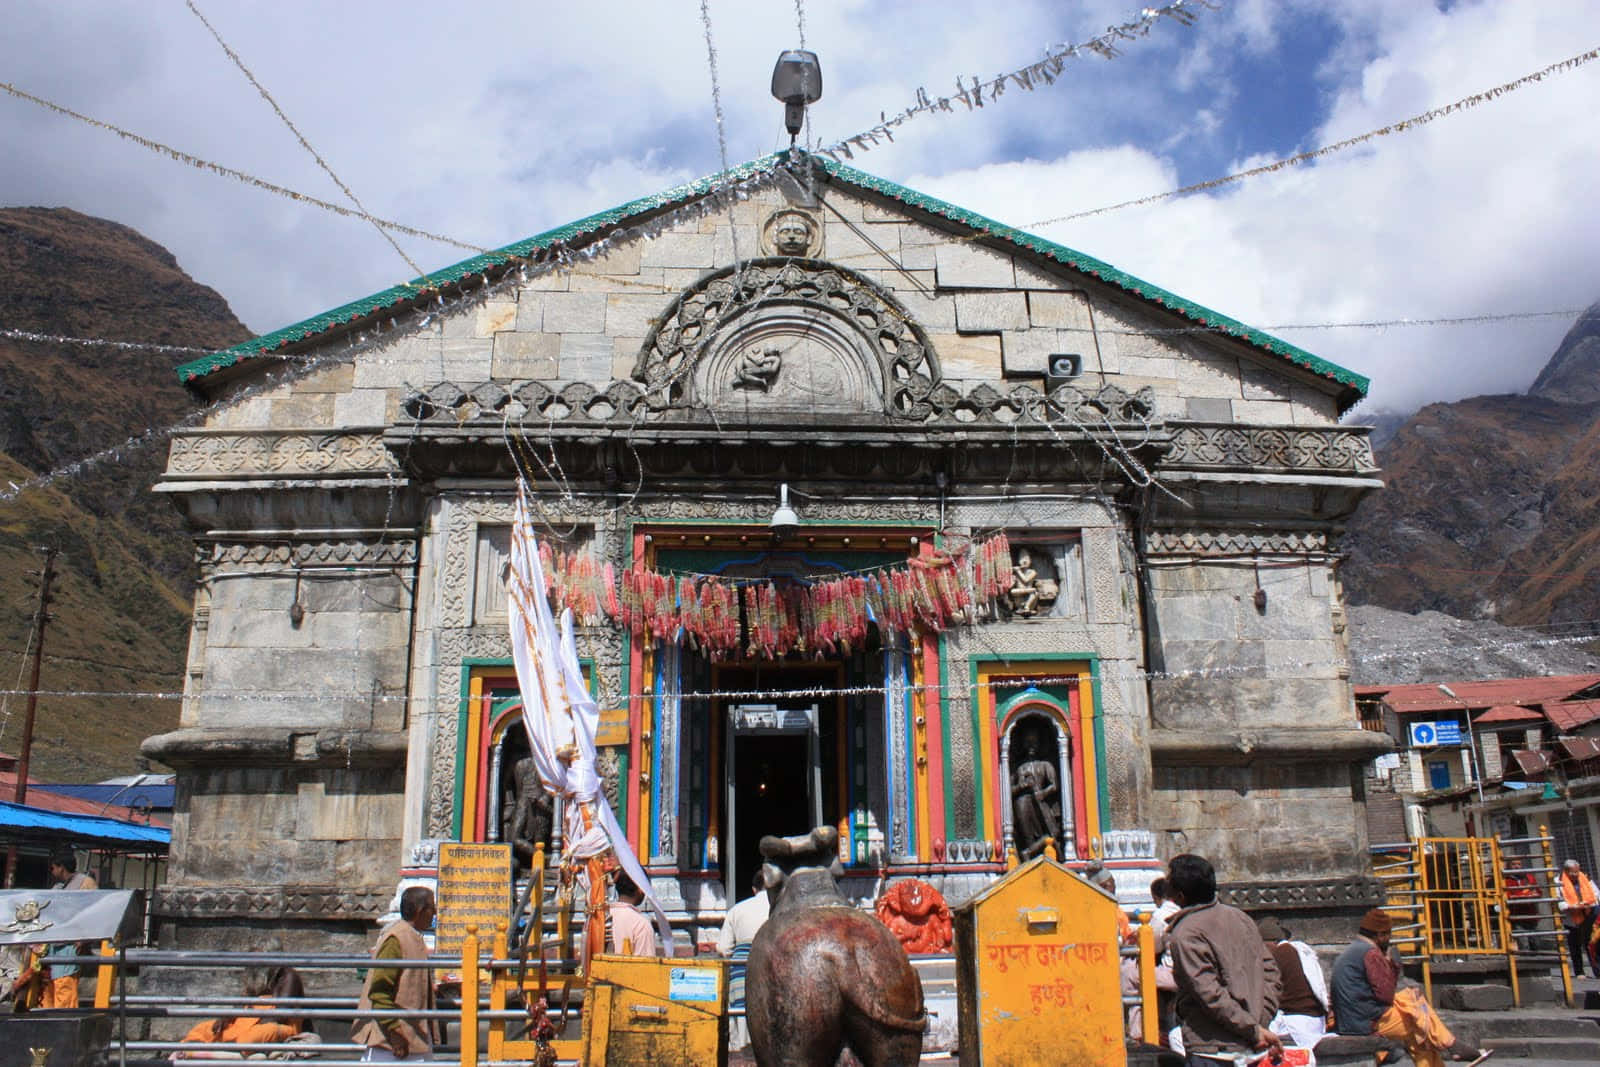 In the midst of the snow-capped peaks of Kedarnath